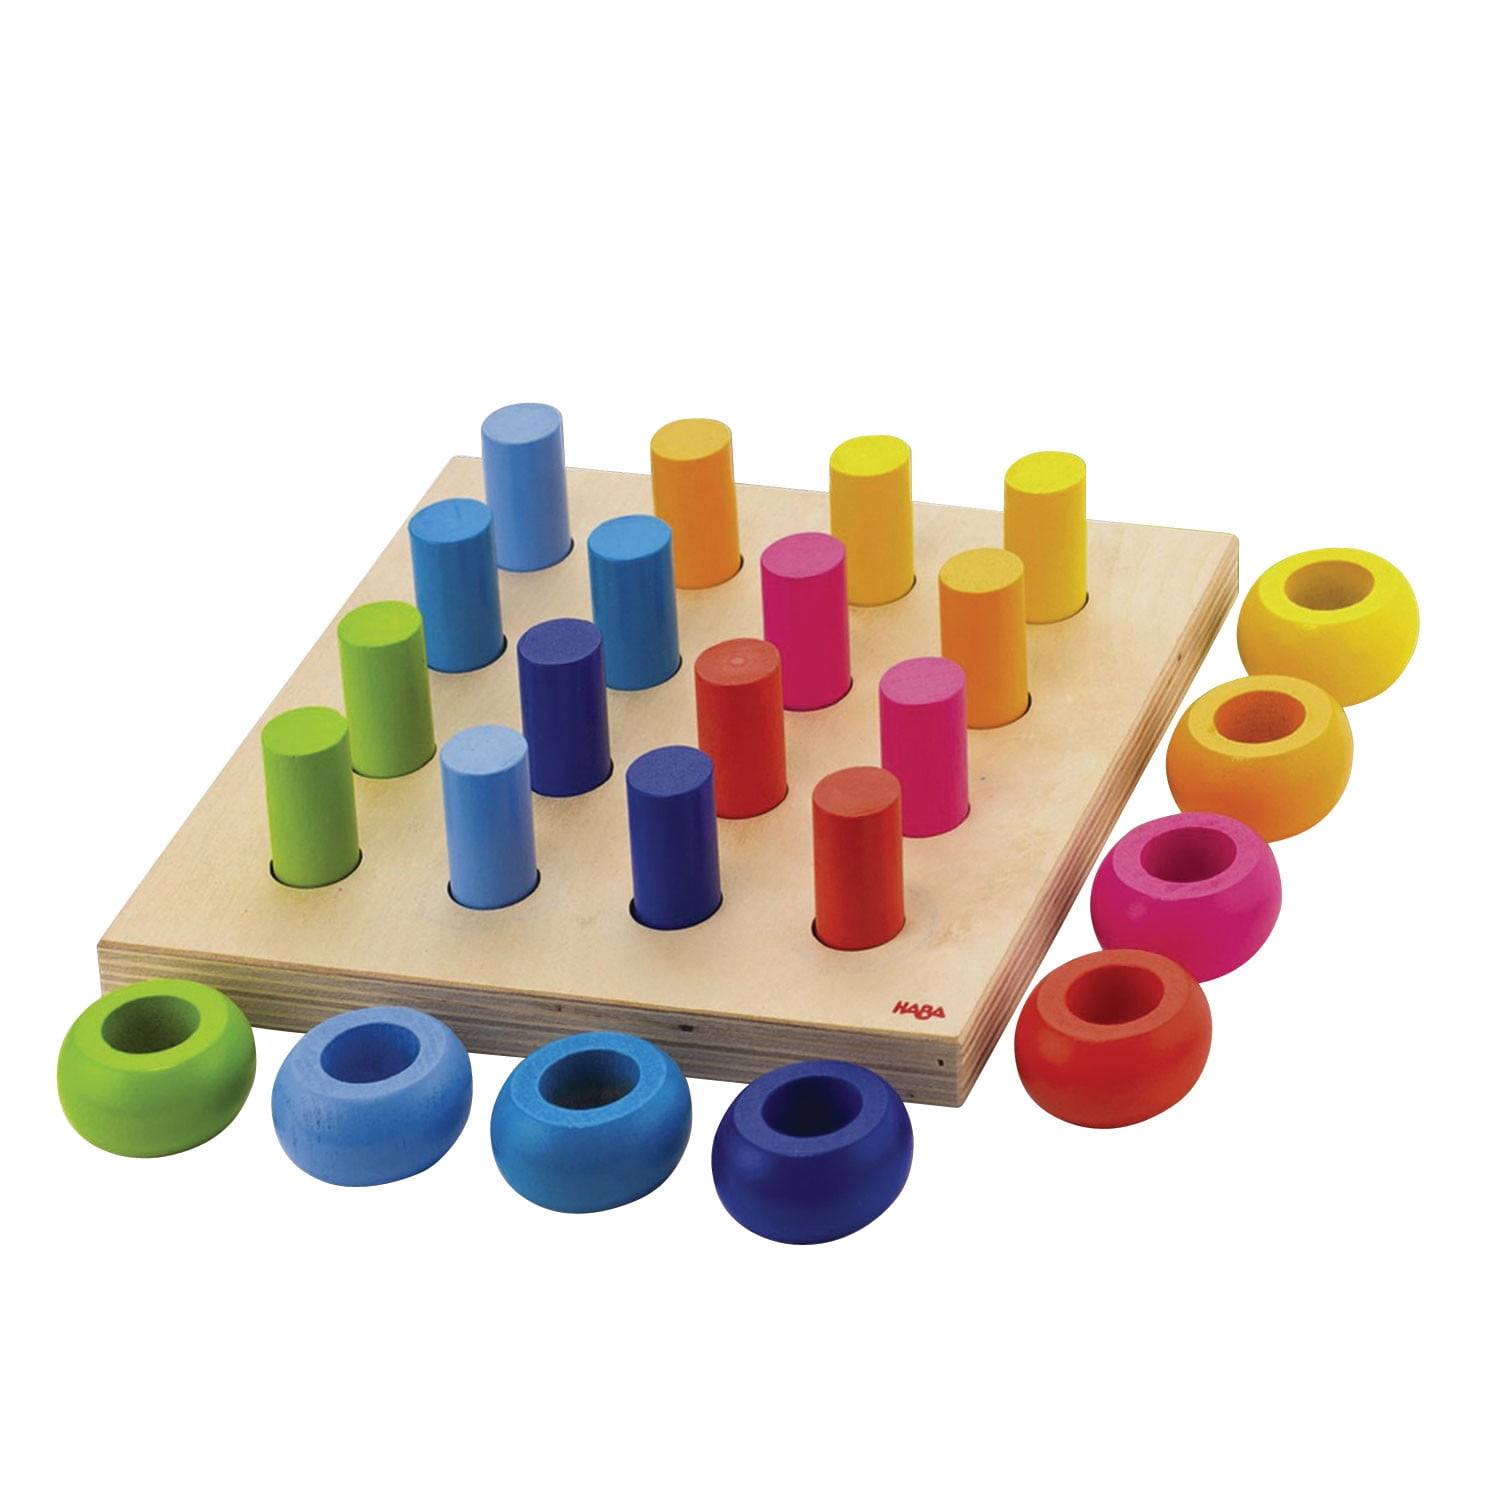 Haba Palette of Wooden Pegs Stacking Toy Activity Set ...